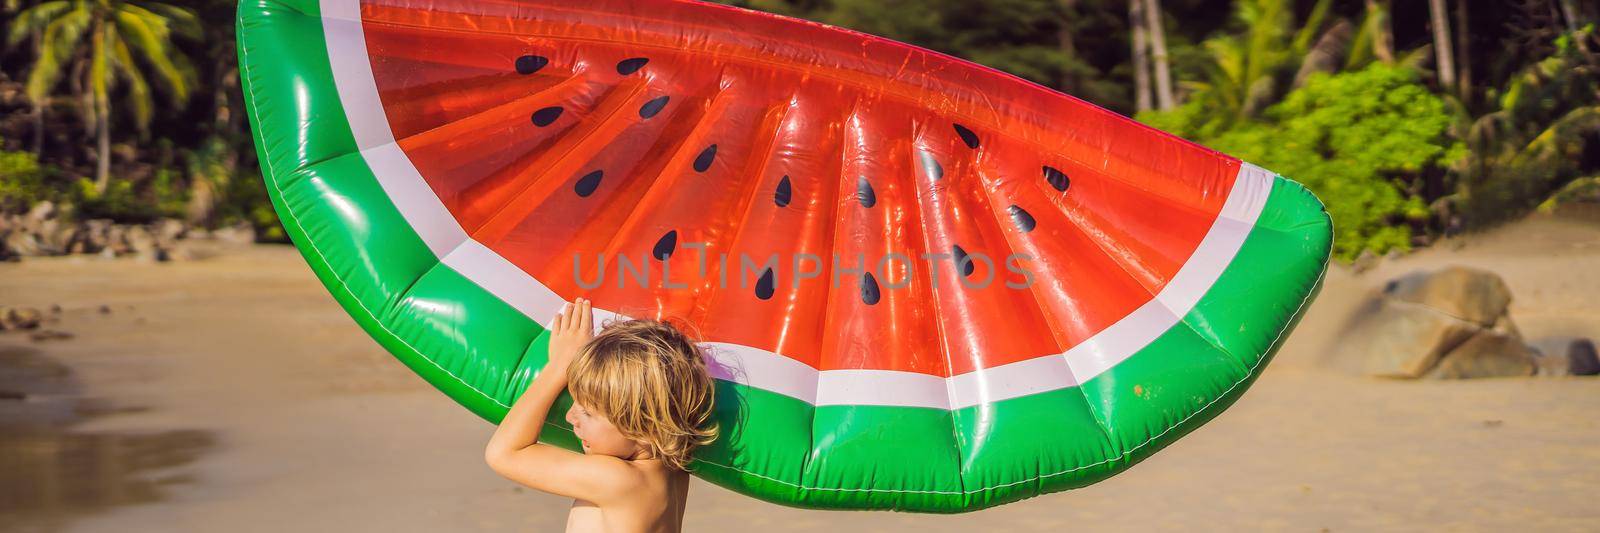 The boy goes to sea with an inflatable mattress BANNER, LONG FORMAT by galitskaya